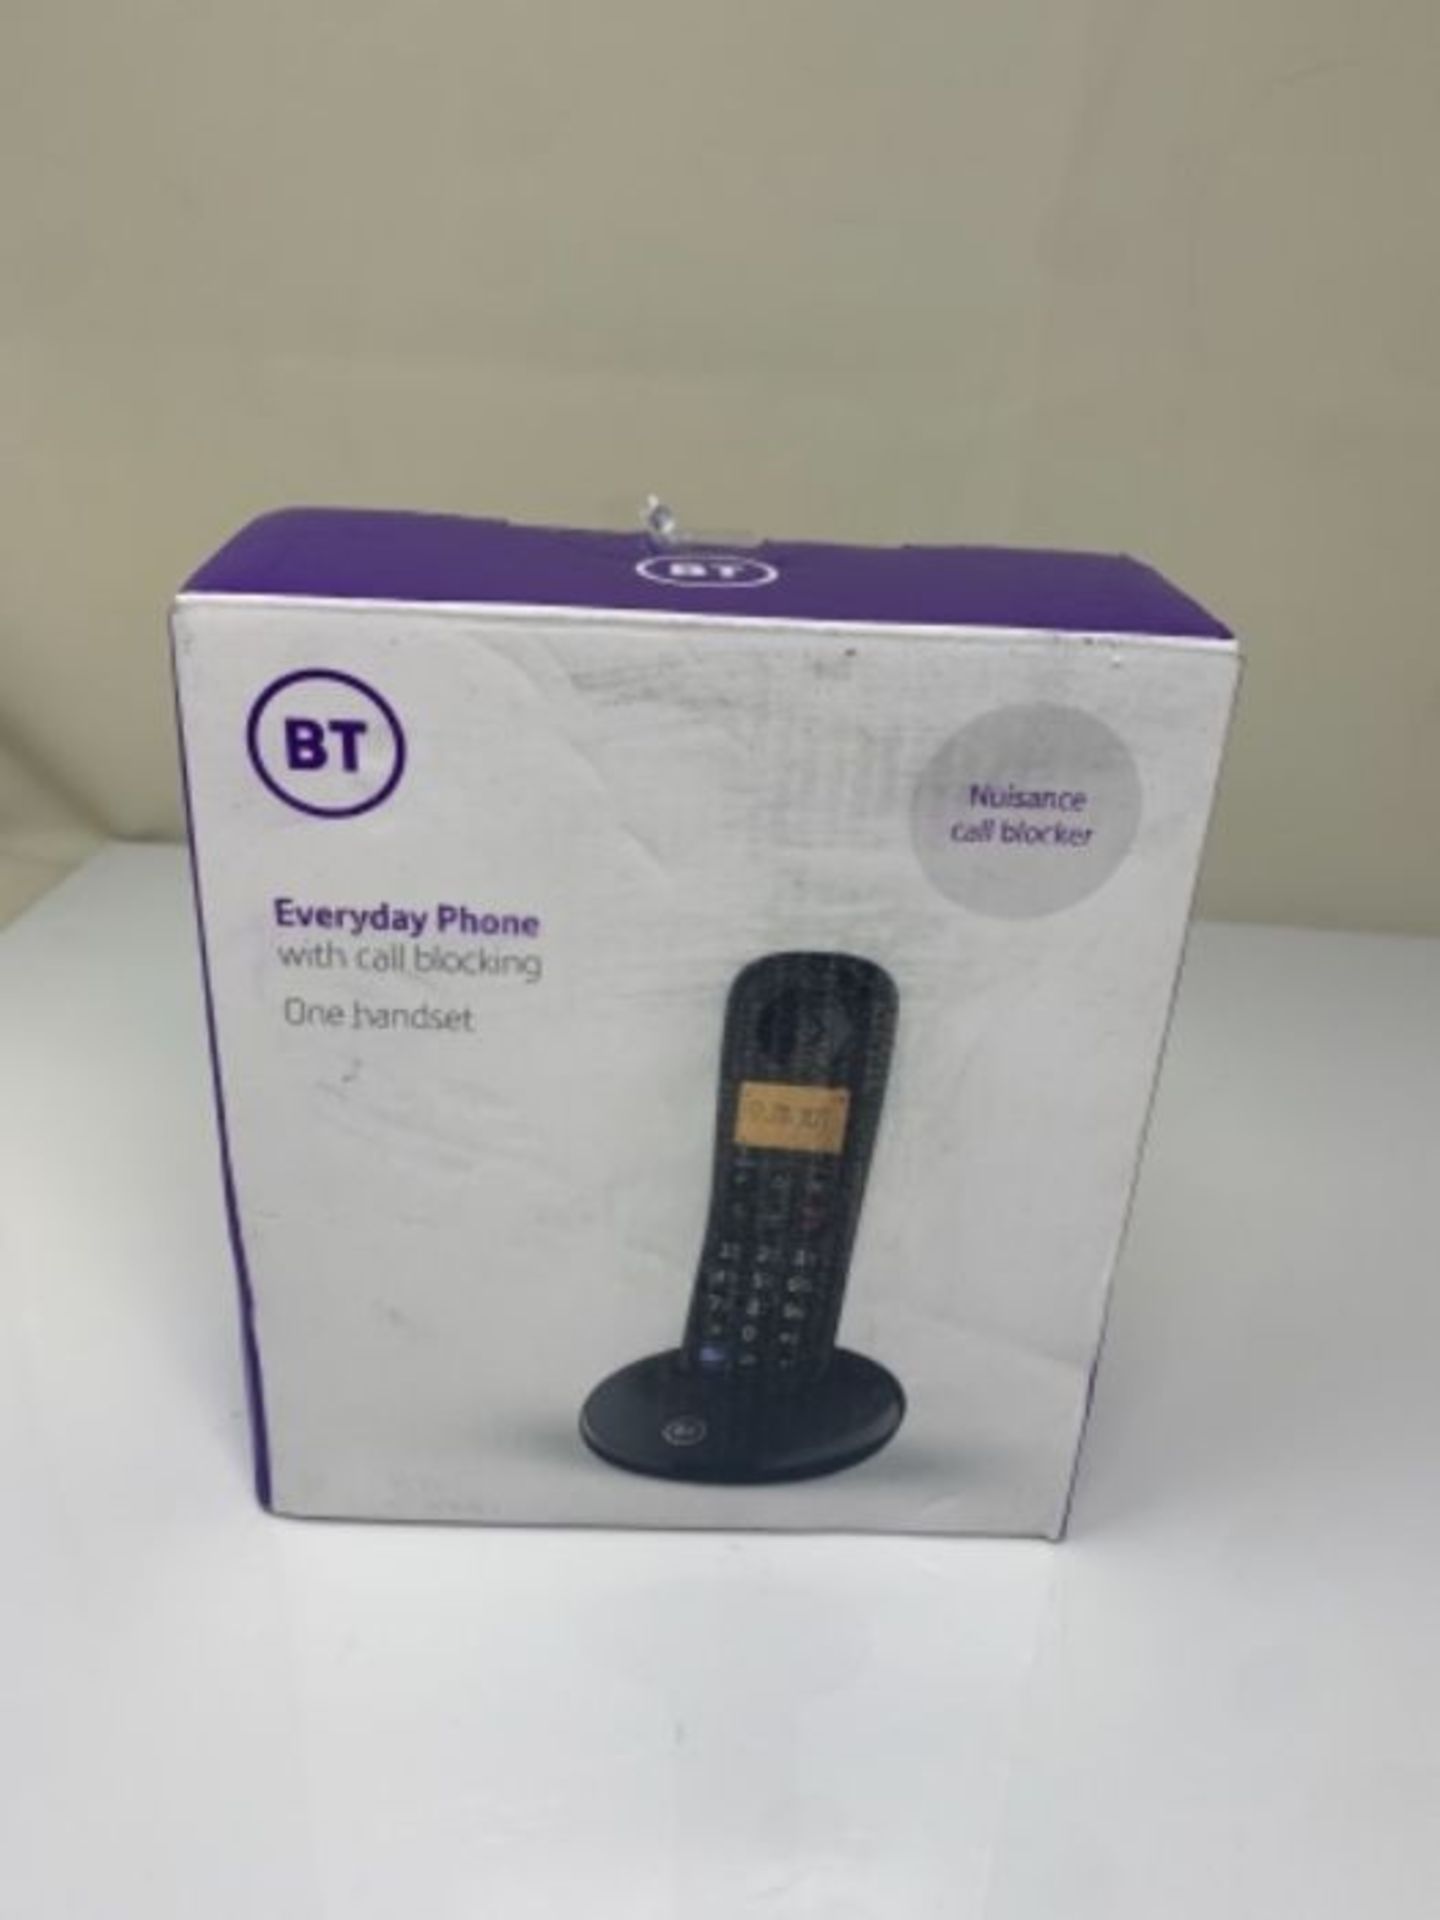 BT Everyday Cordless Home Phone with Basic Call Blocking, Single Handset Pack, Black - Image 2 of 3